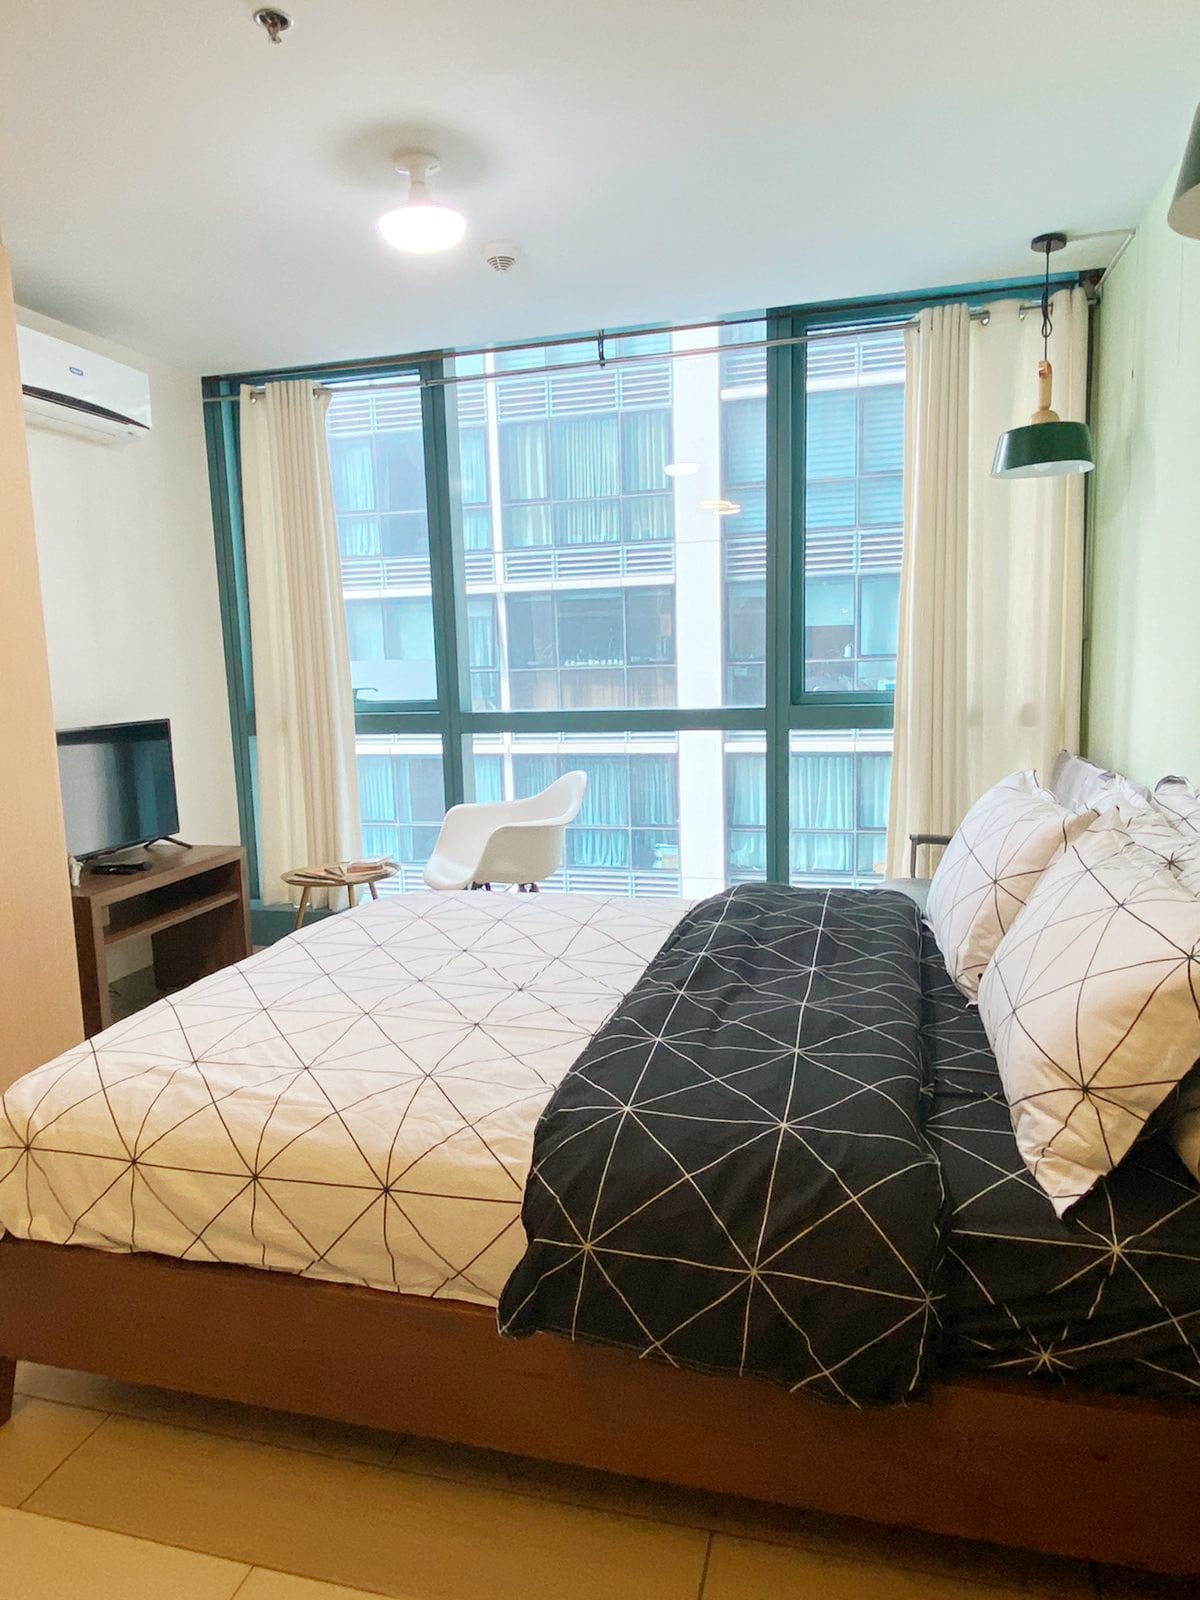 One Uptown Residence: 1BR Retreat Haven